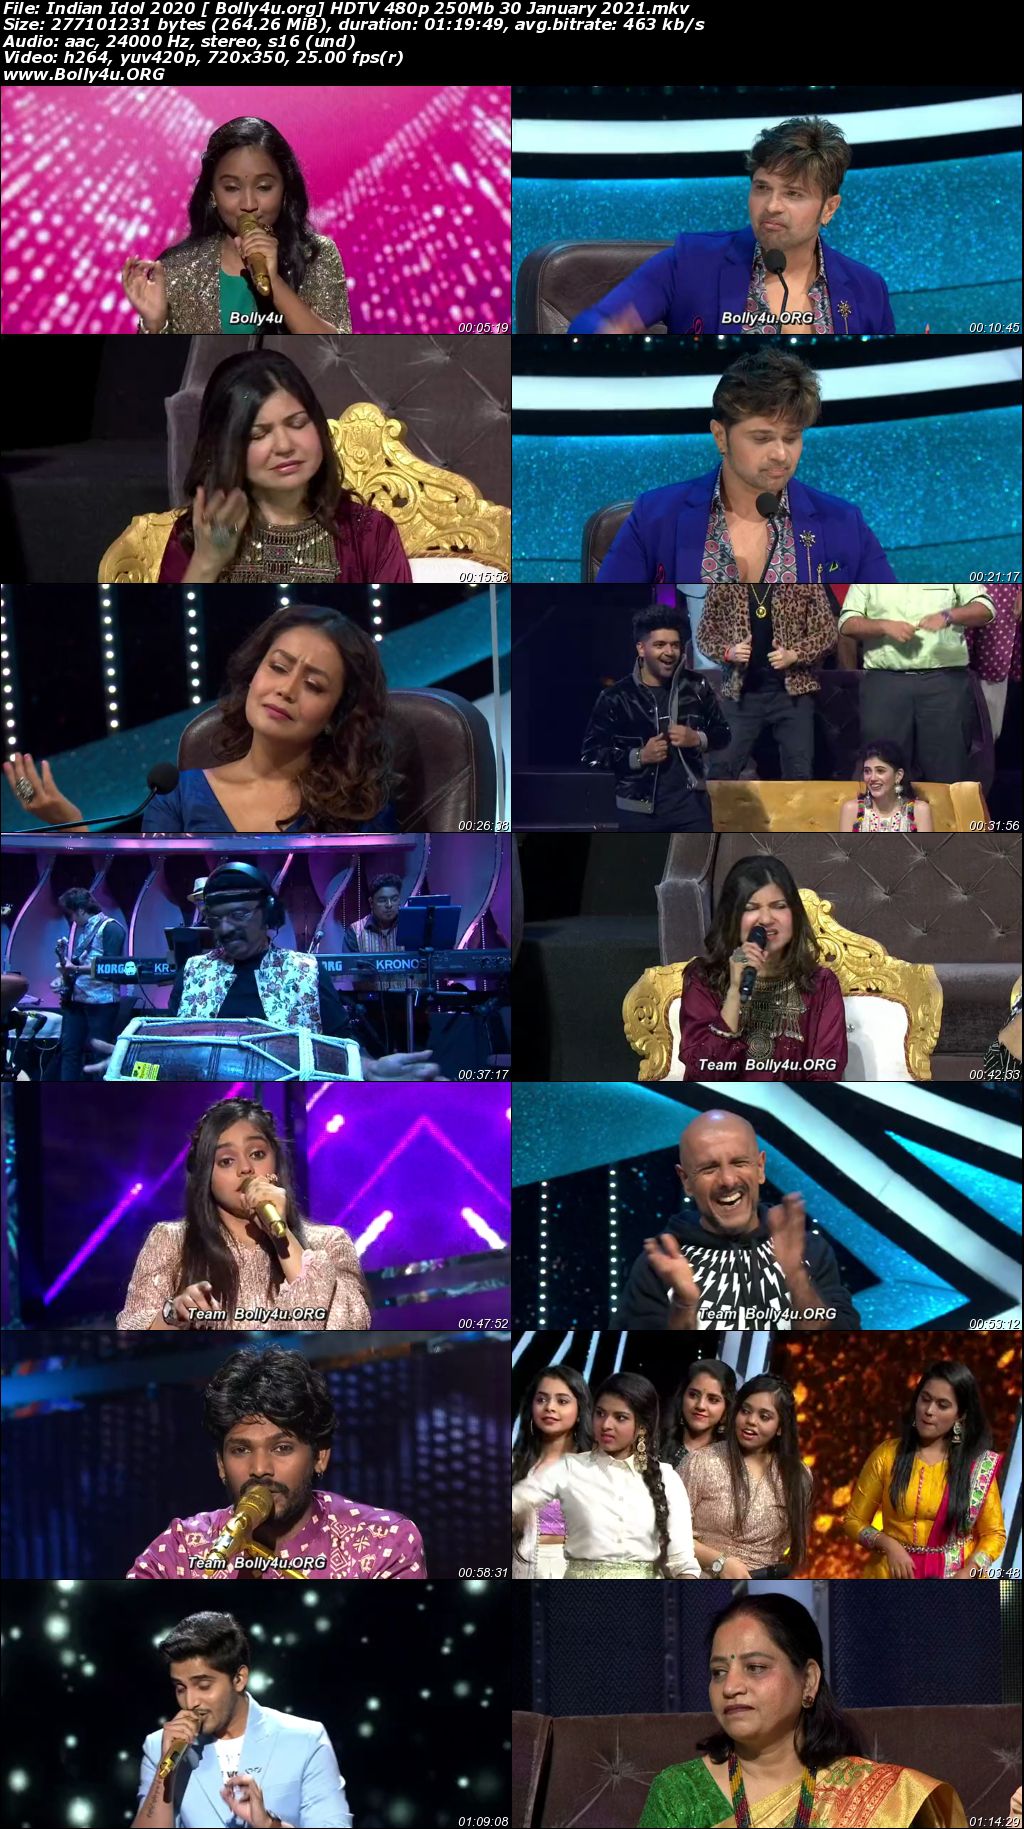 Indian Idol 2021 HDTV 480p 250Mb 30 January 2021 Download